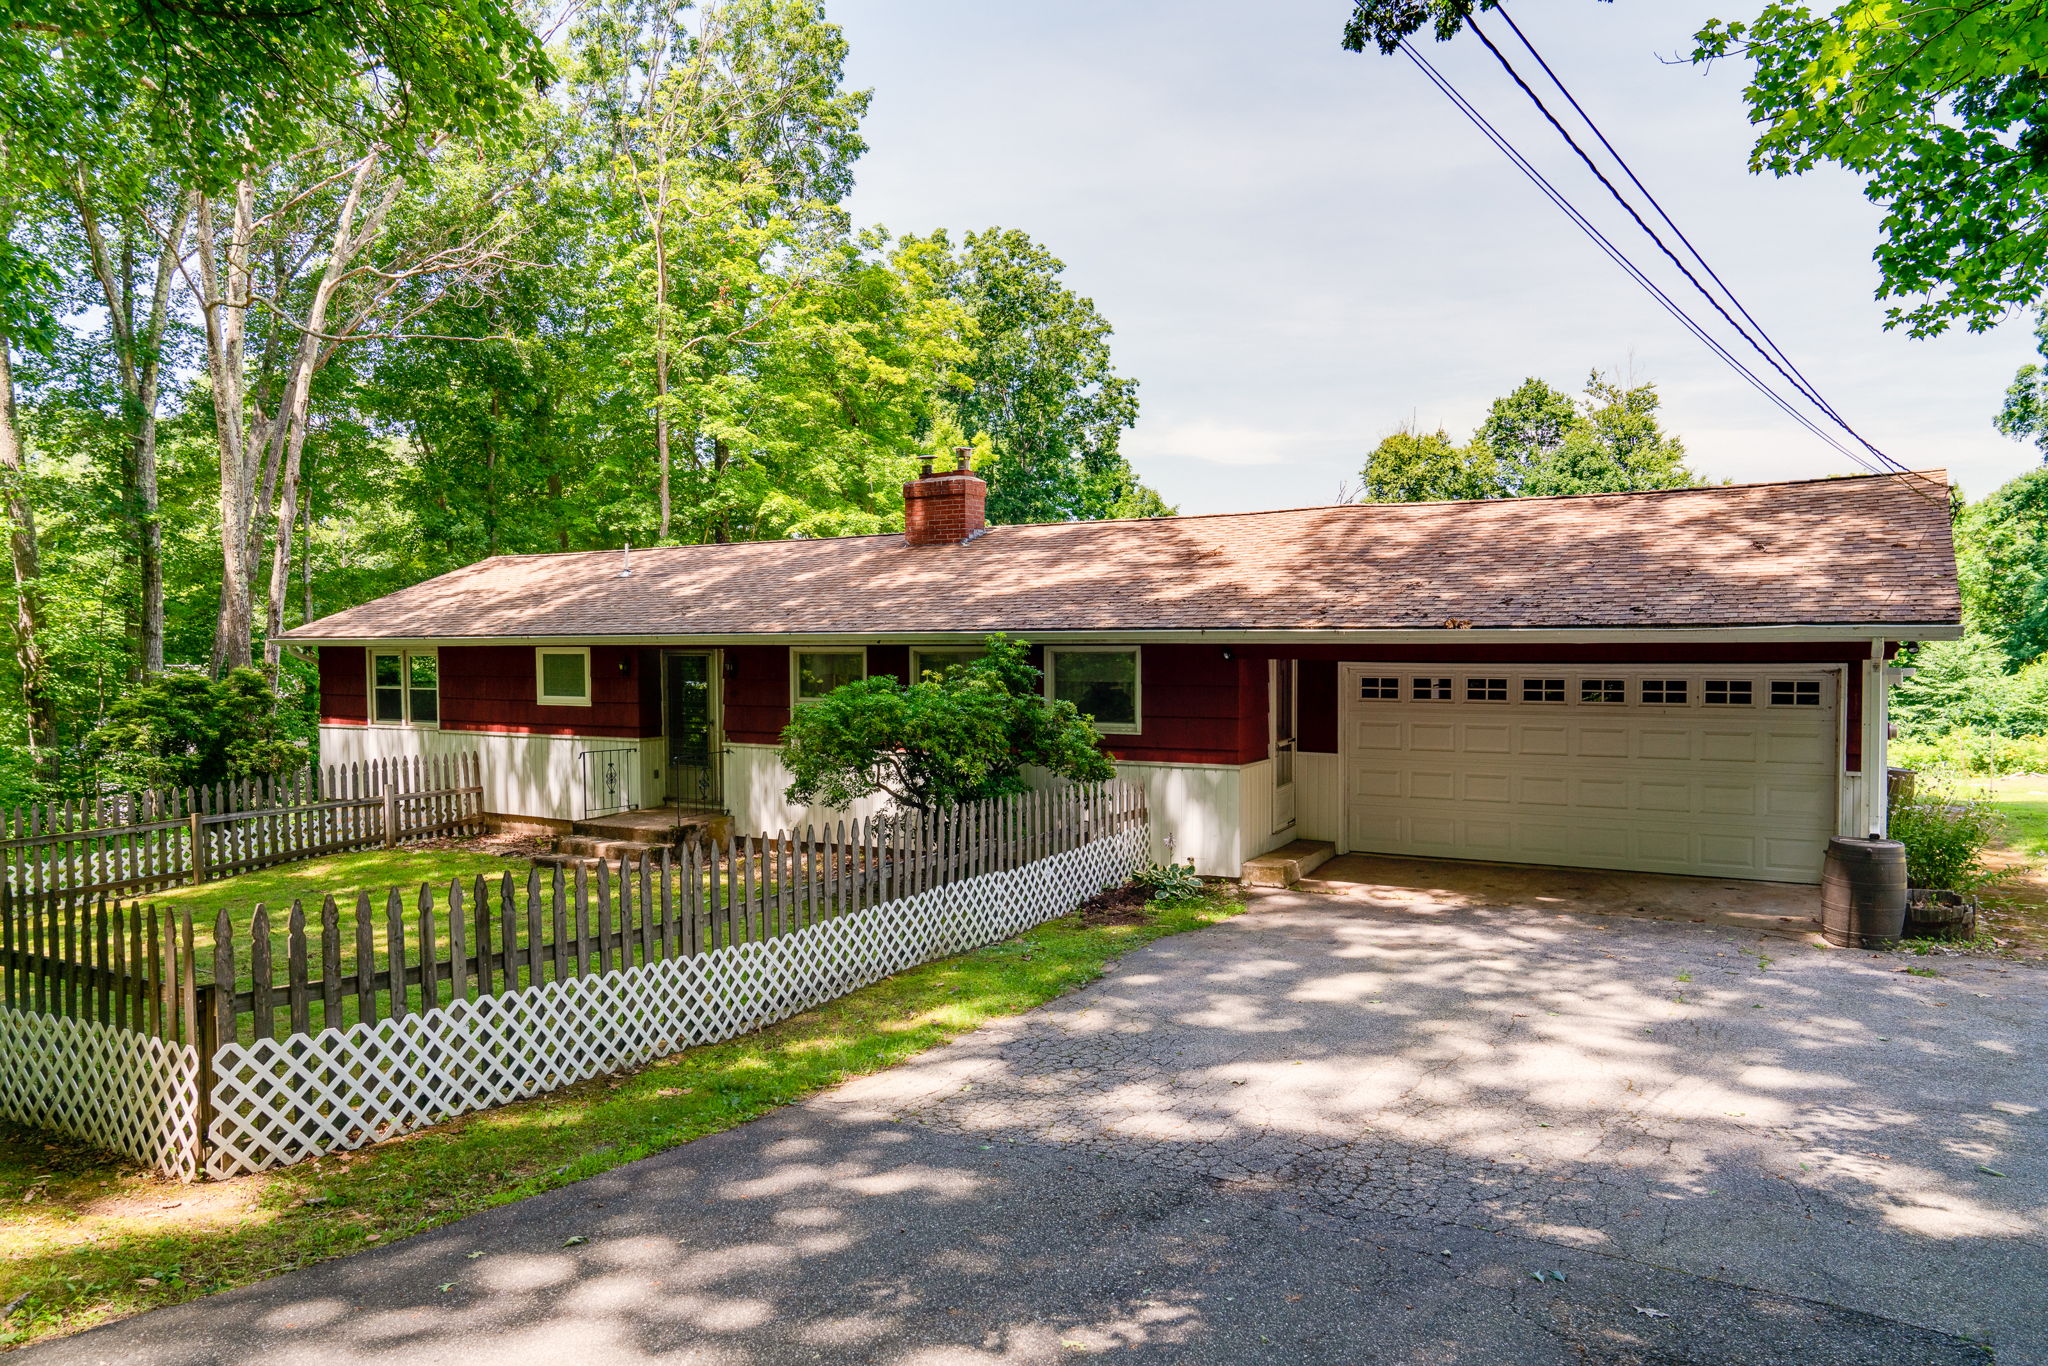  49 Old Willimantic Rd, Columbia, CT 06237, US